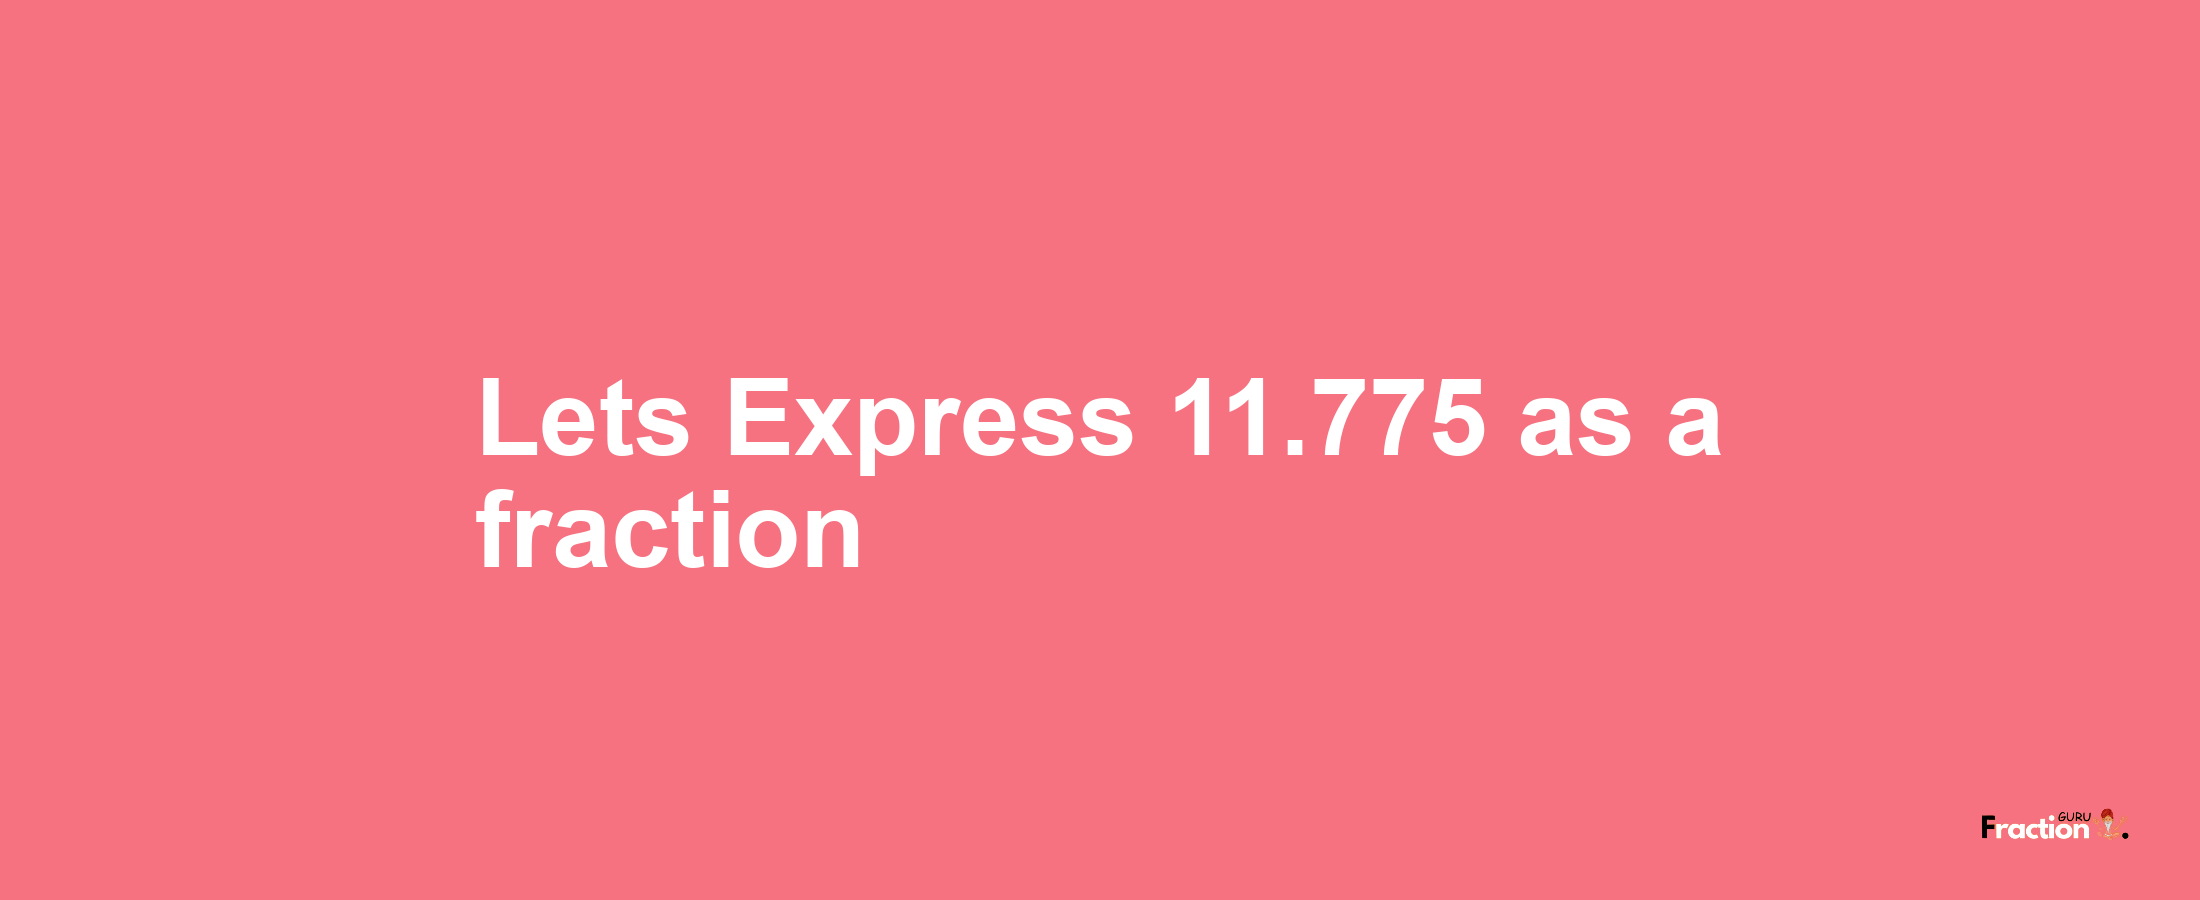 Lets Express 11.775 as afraction